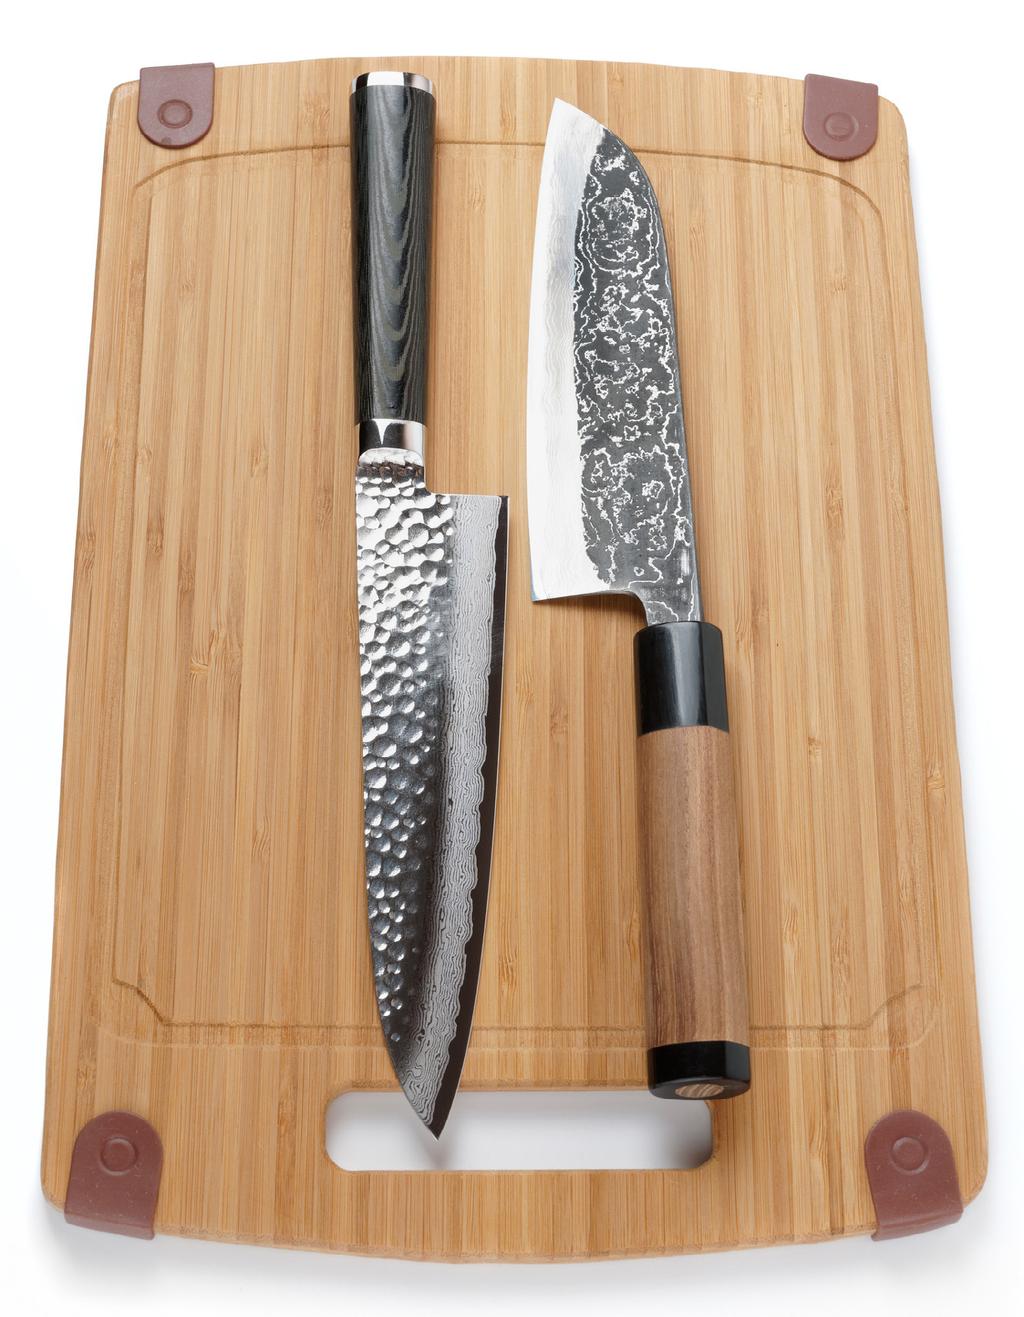 Santoku The Santoku, or the three virtues, is not actually a knife used in many sushi bars.